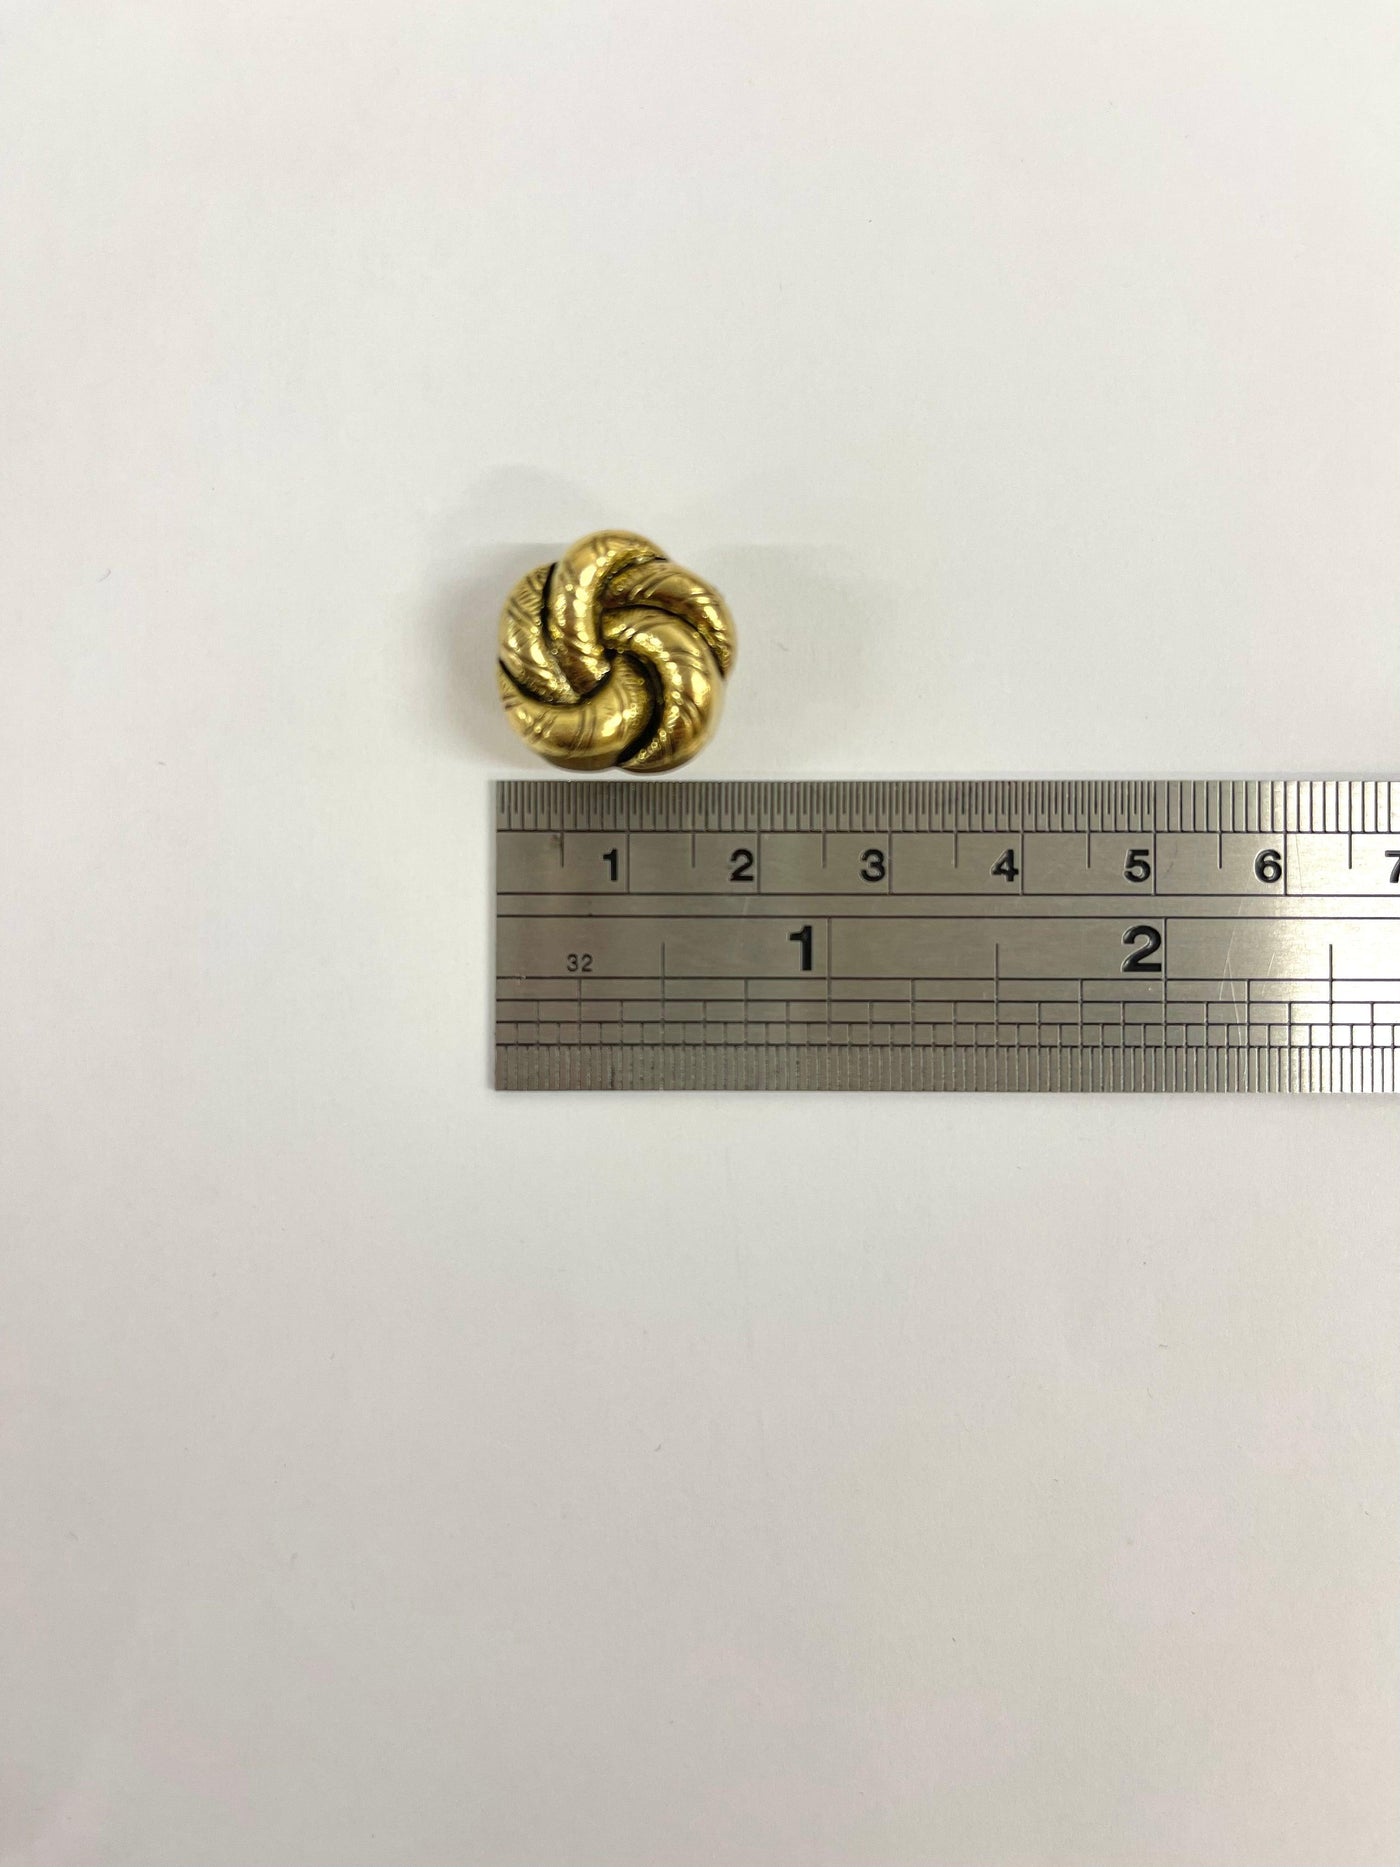 Gold Knot Button - Carr & Westley